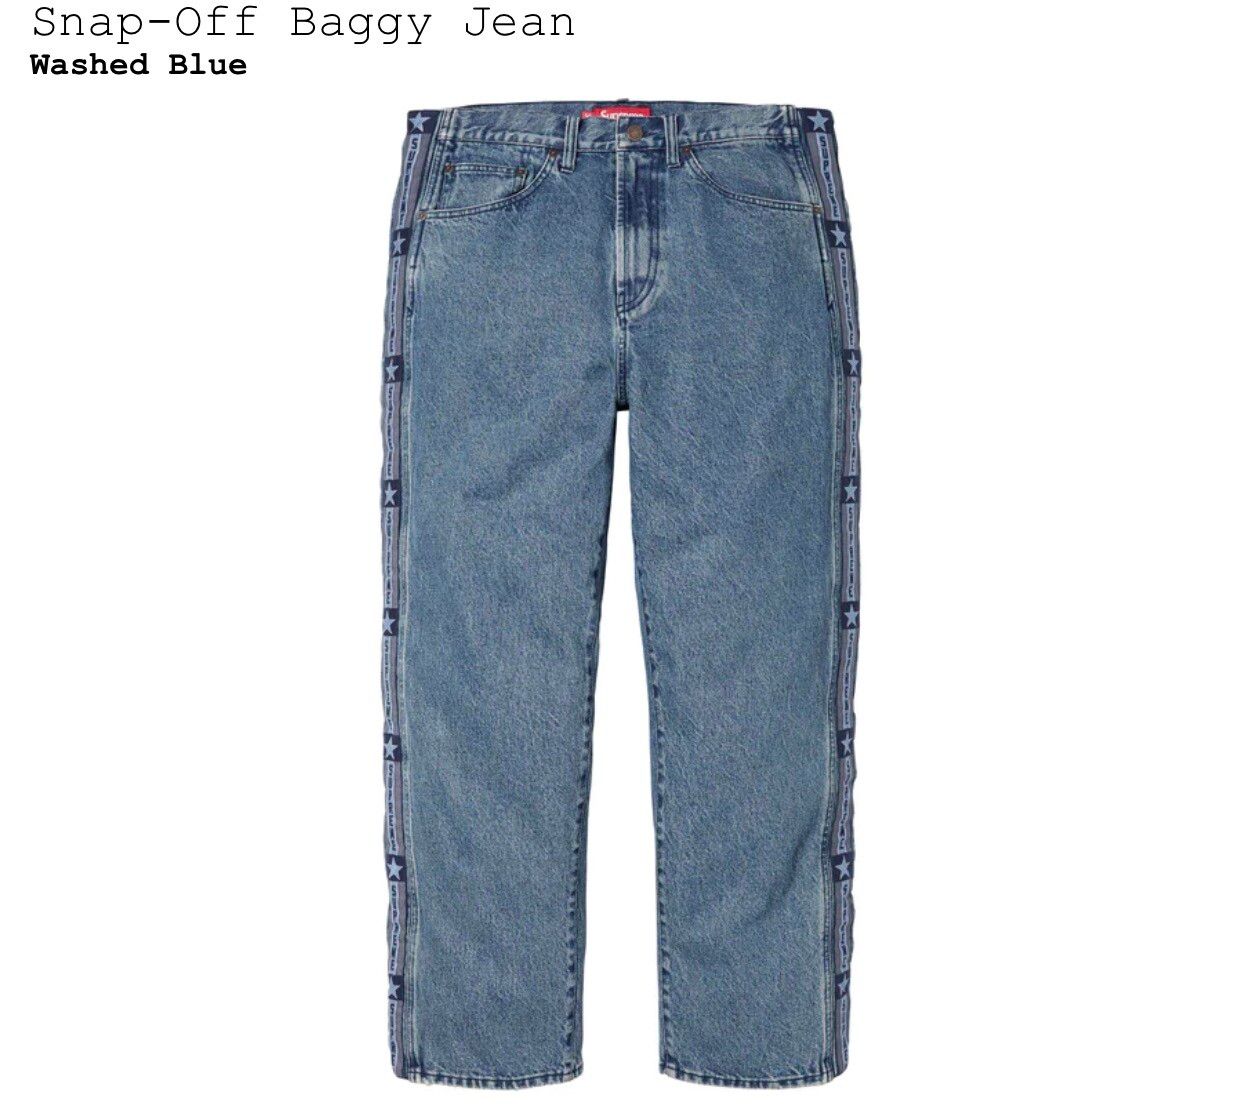 Supreme Supreme Snap-Off Baggy Jeans | Grailed